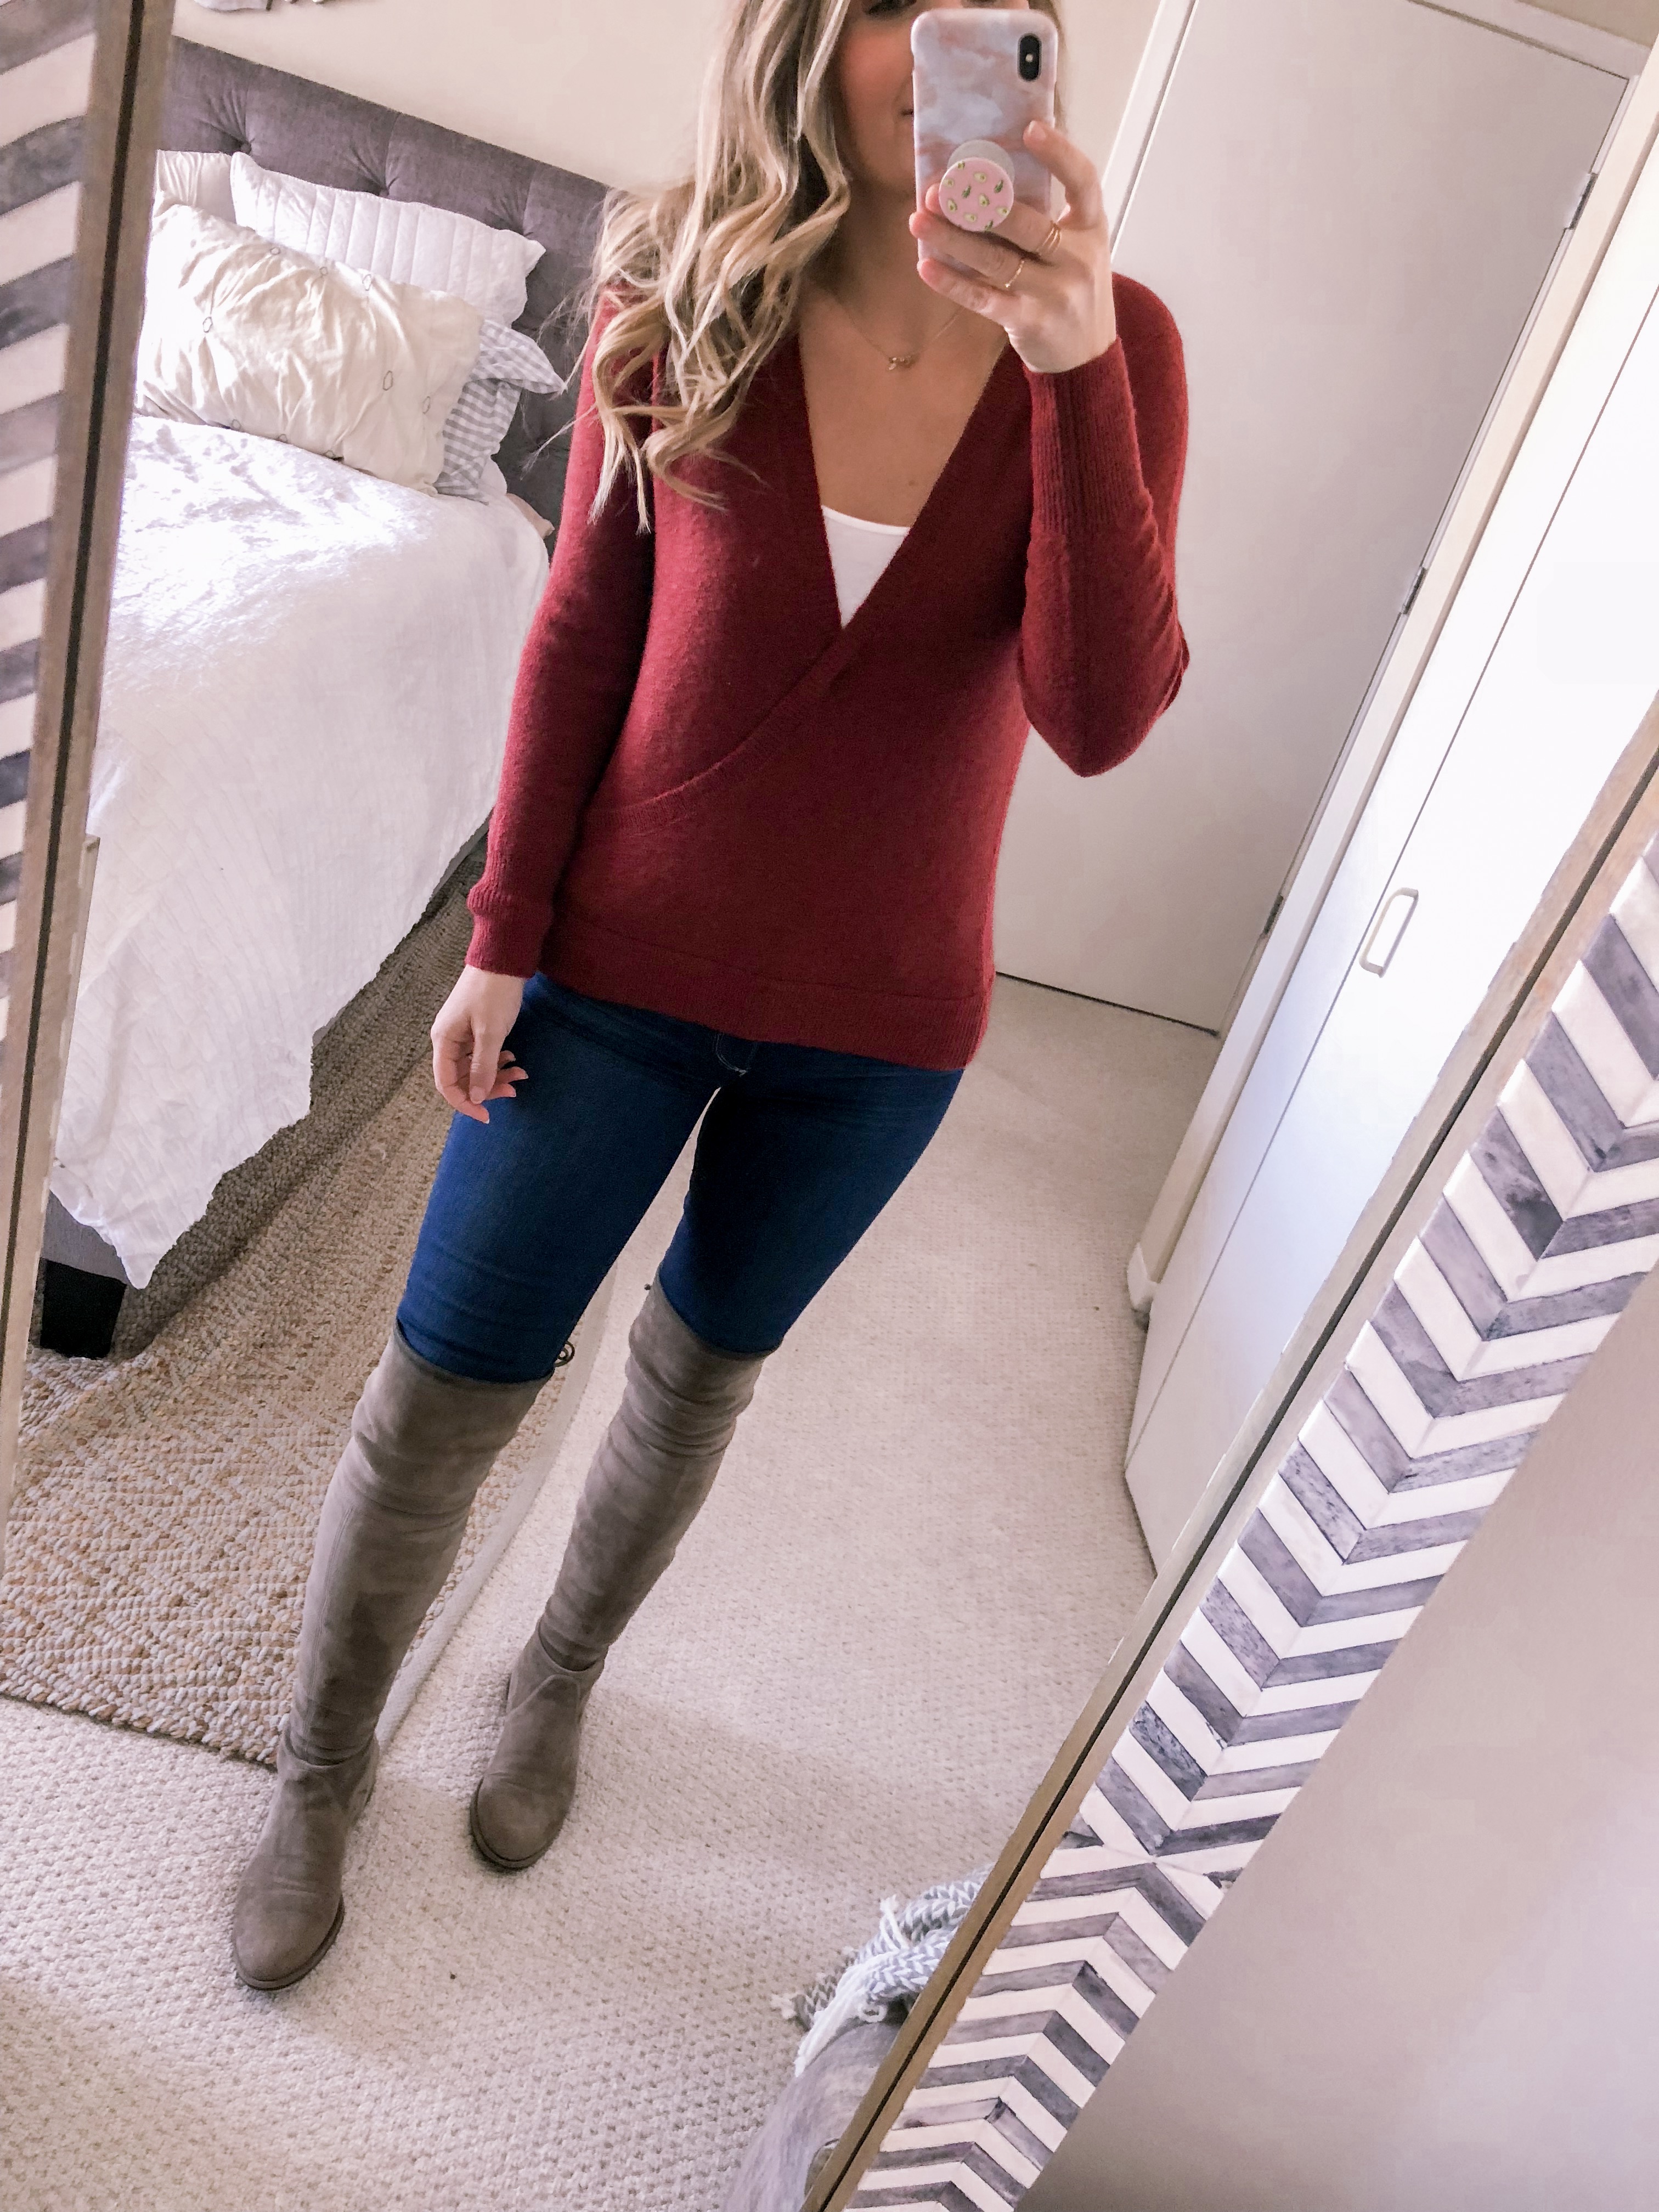 Jenna Colgrove, Chicago fashion blogger, wears a burgundy wrap sweater by Madewell from Norstrom with Stuart Weitzman over the knee suede boots for a fall work outfit idea for the office.